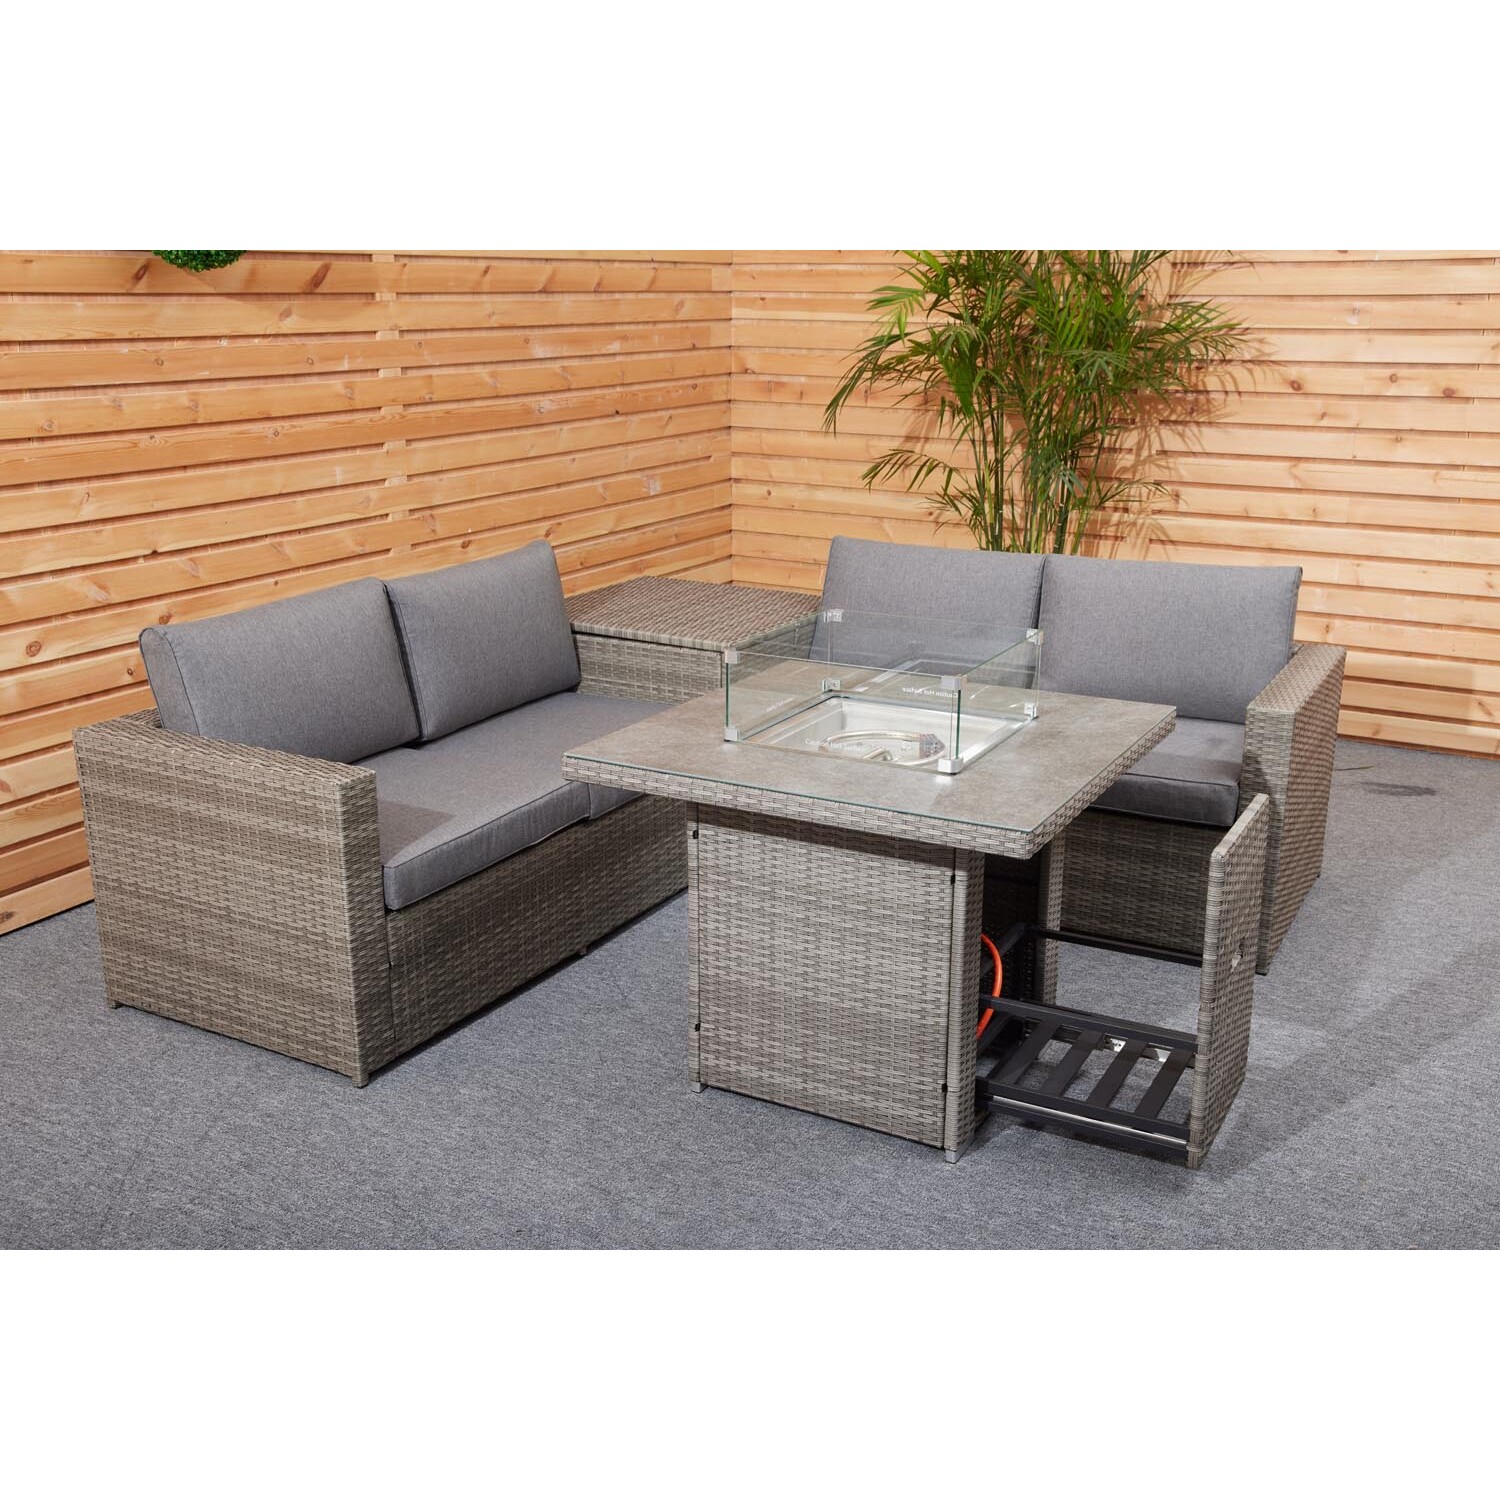 Malay Deluxe Malay New Hampshire 4 Seater Grey Conversation Firepit Lounge Set Image 5